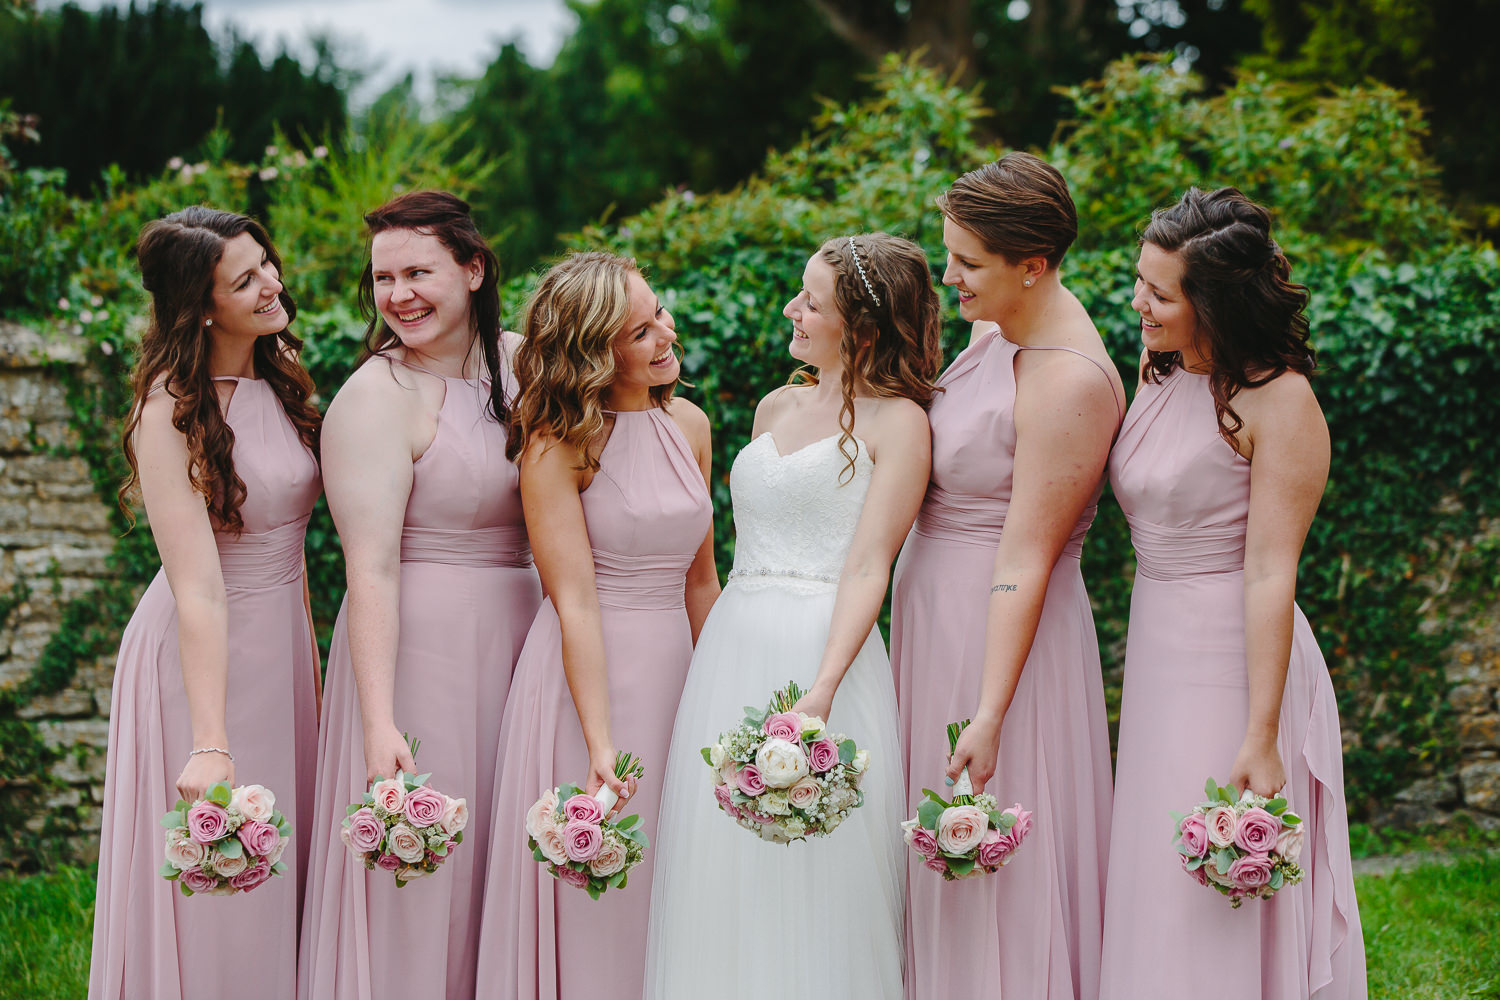 A bride and her bridesmaid smiling at each other while standing in a row.